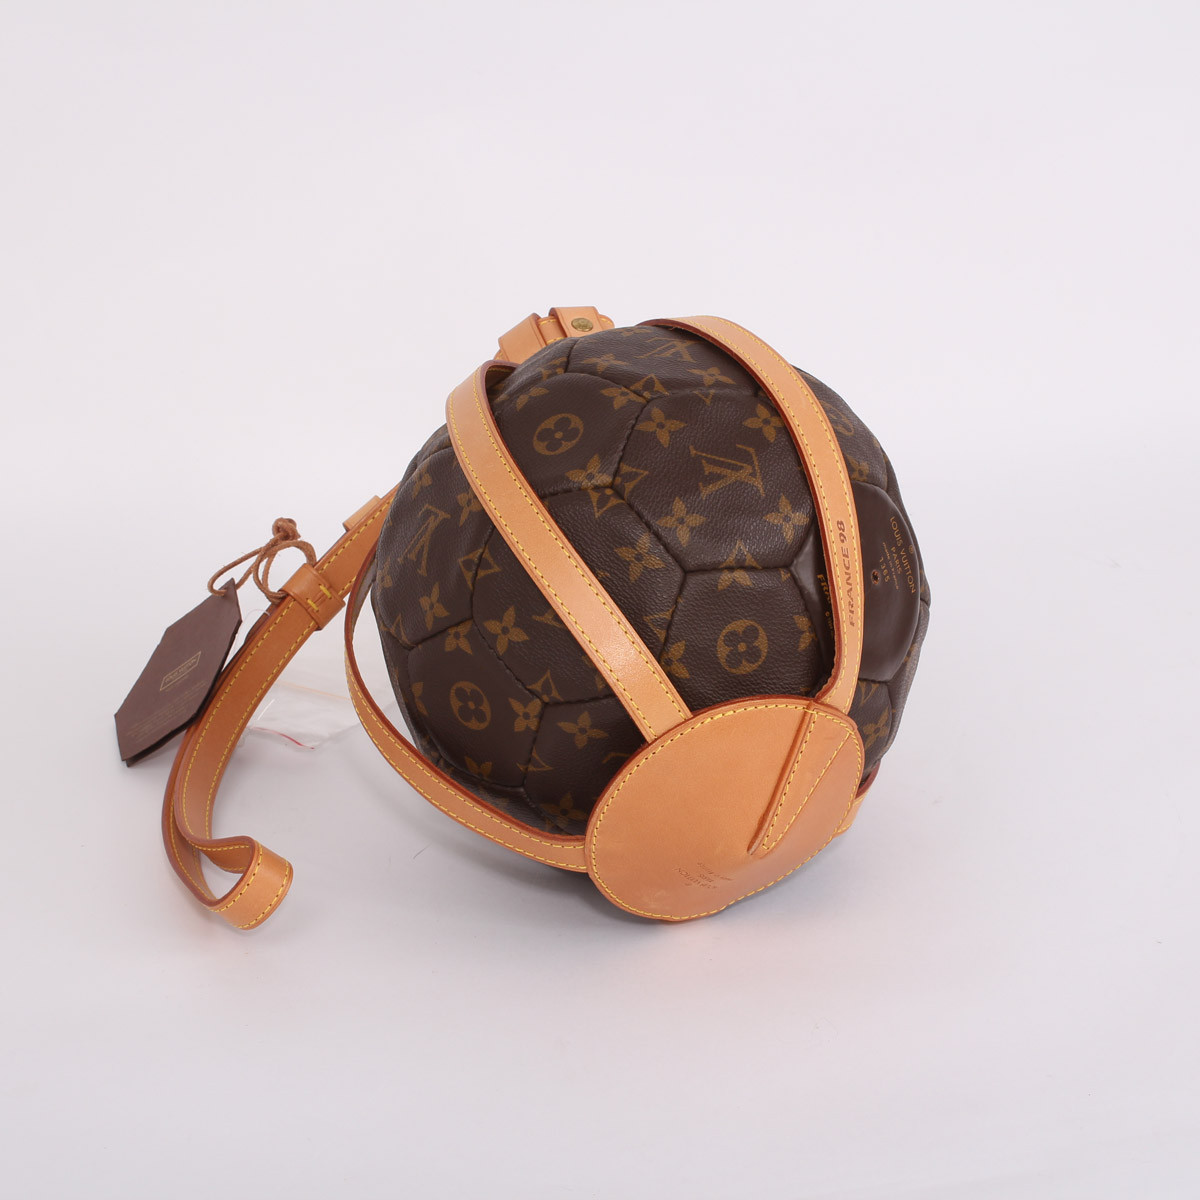 A limited edition monogrammed soccer ball with leather holder made by Louis  Vuitton for the World Cup in France in 1998 Together with a copy of  Rebonds a limited edition Louis Vuitton